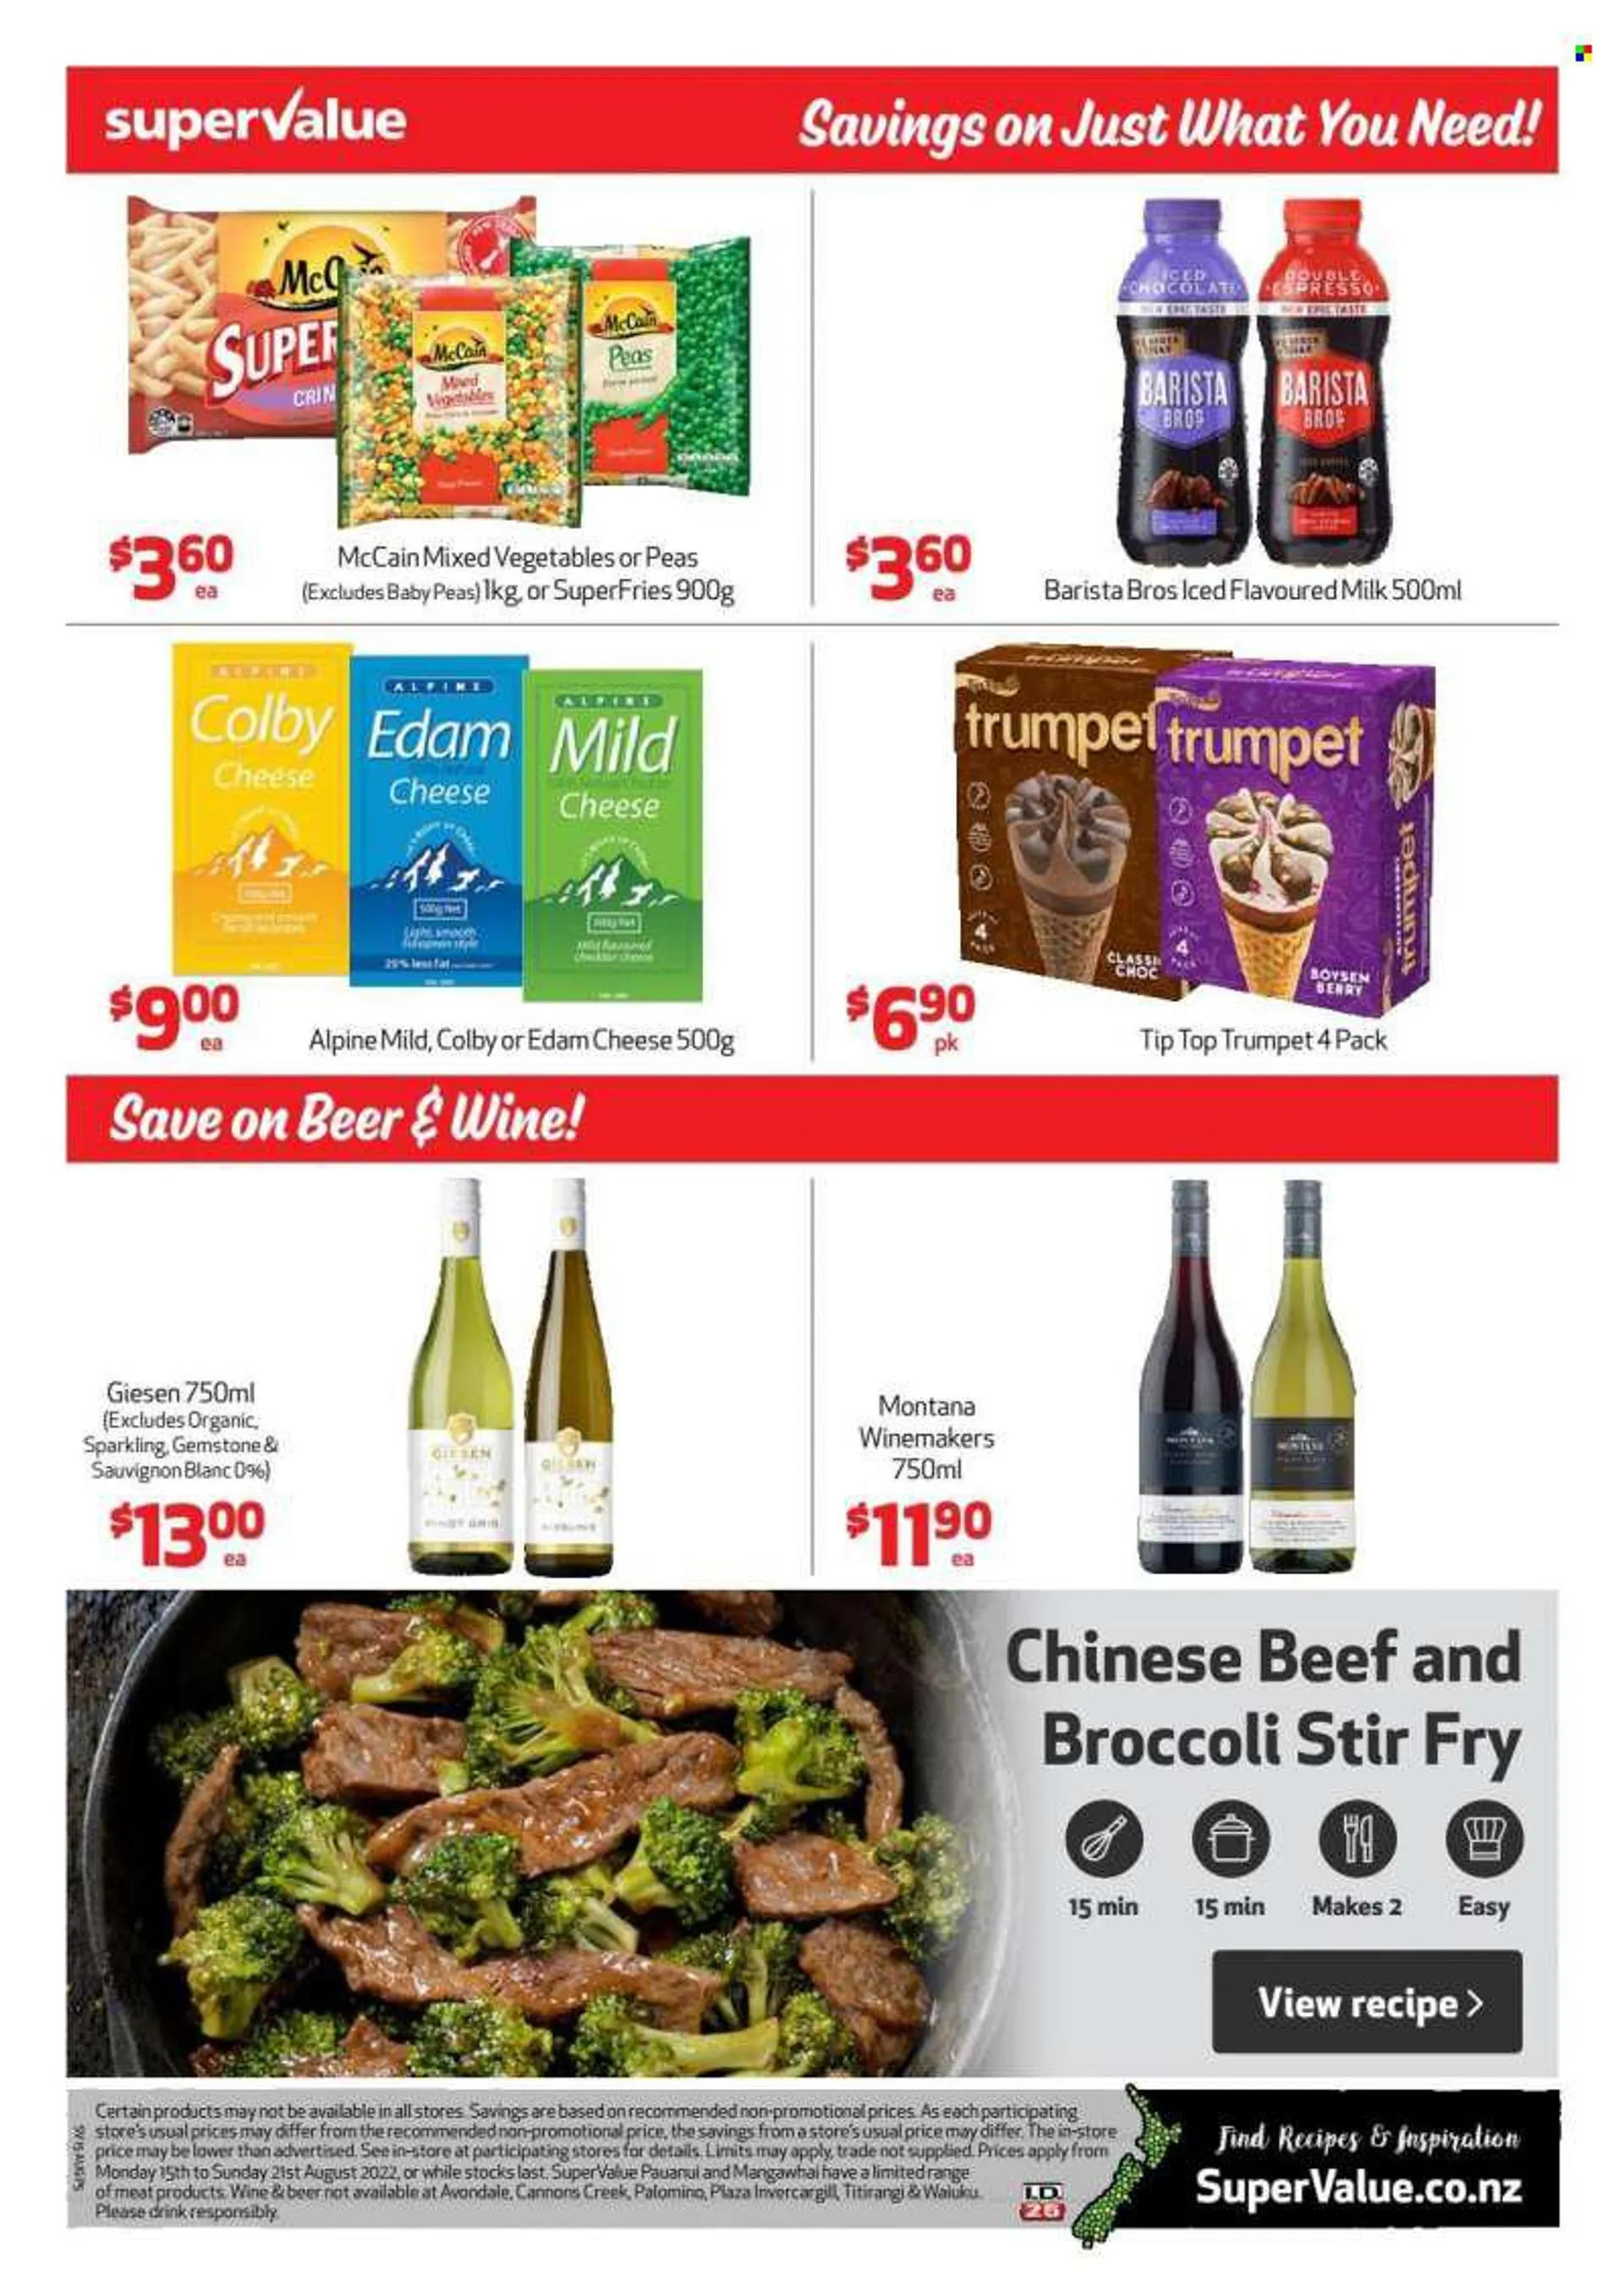 SuperValue mailer - 15.08.2022 - 21.08.2022 - Sales products - Tip Top, colby cheese, edam cheese, cheddar, cheese, mild cheese, milk, flavoured milk, mixed vegetables, McCain, potato fries, chocolate, wine, Pinot Grigio, Sauvignon Blanc, beer. Page 5.